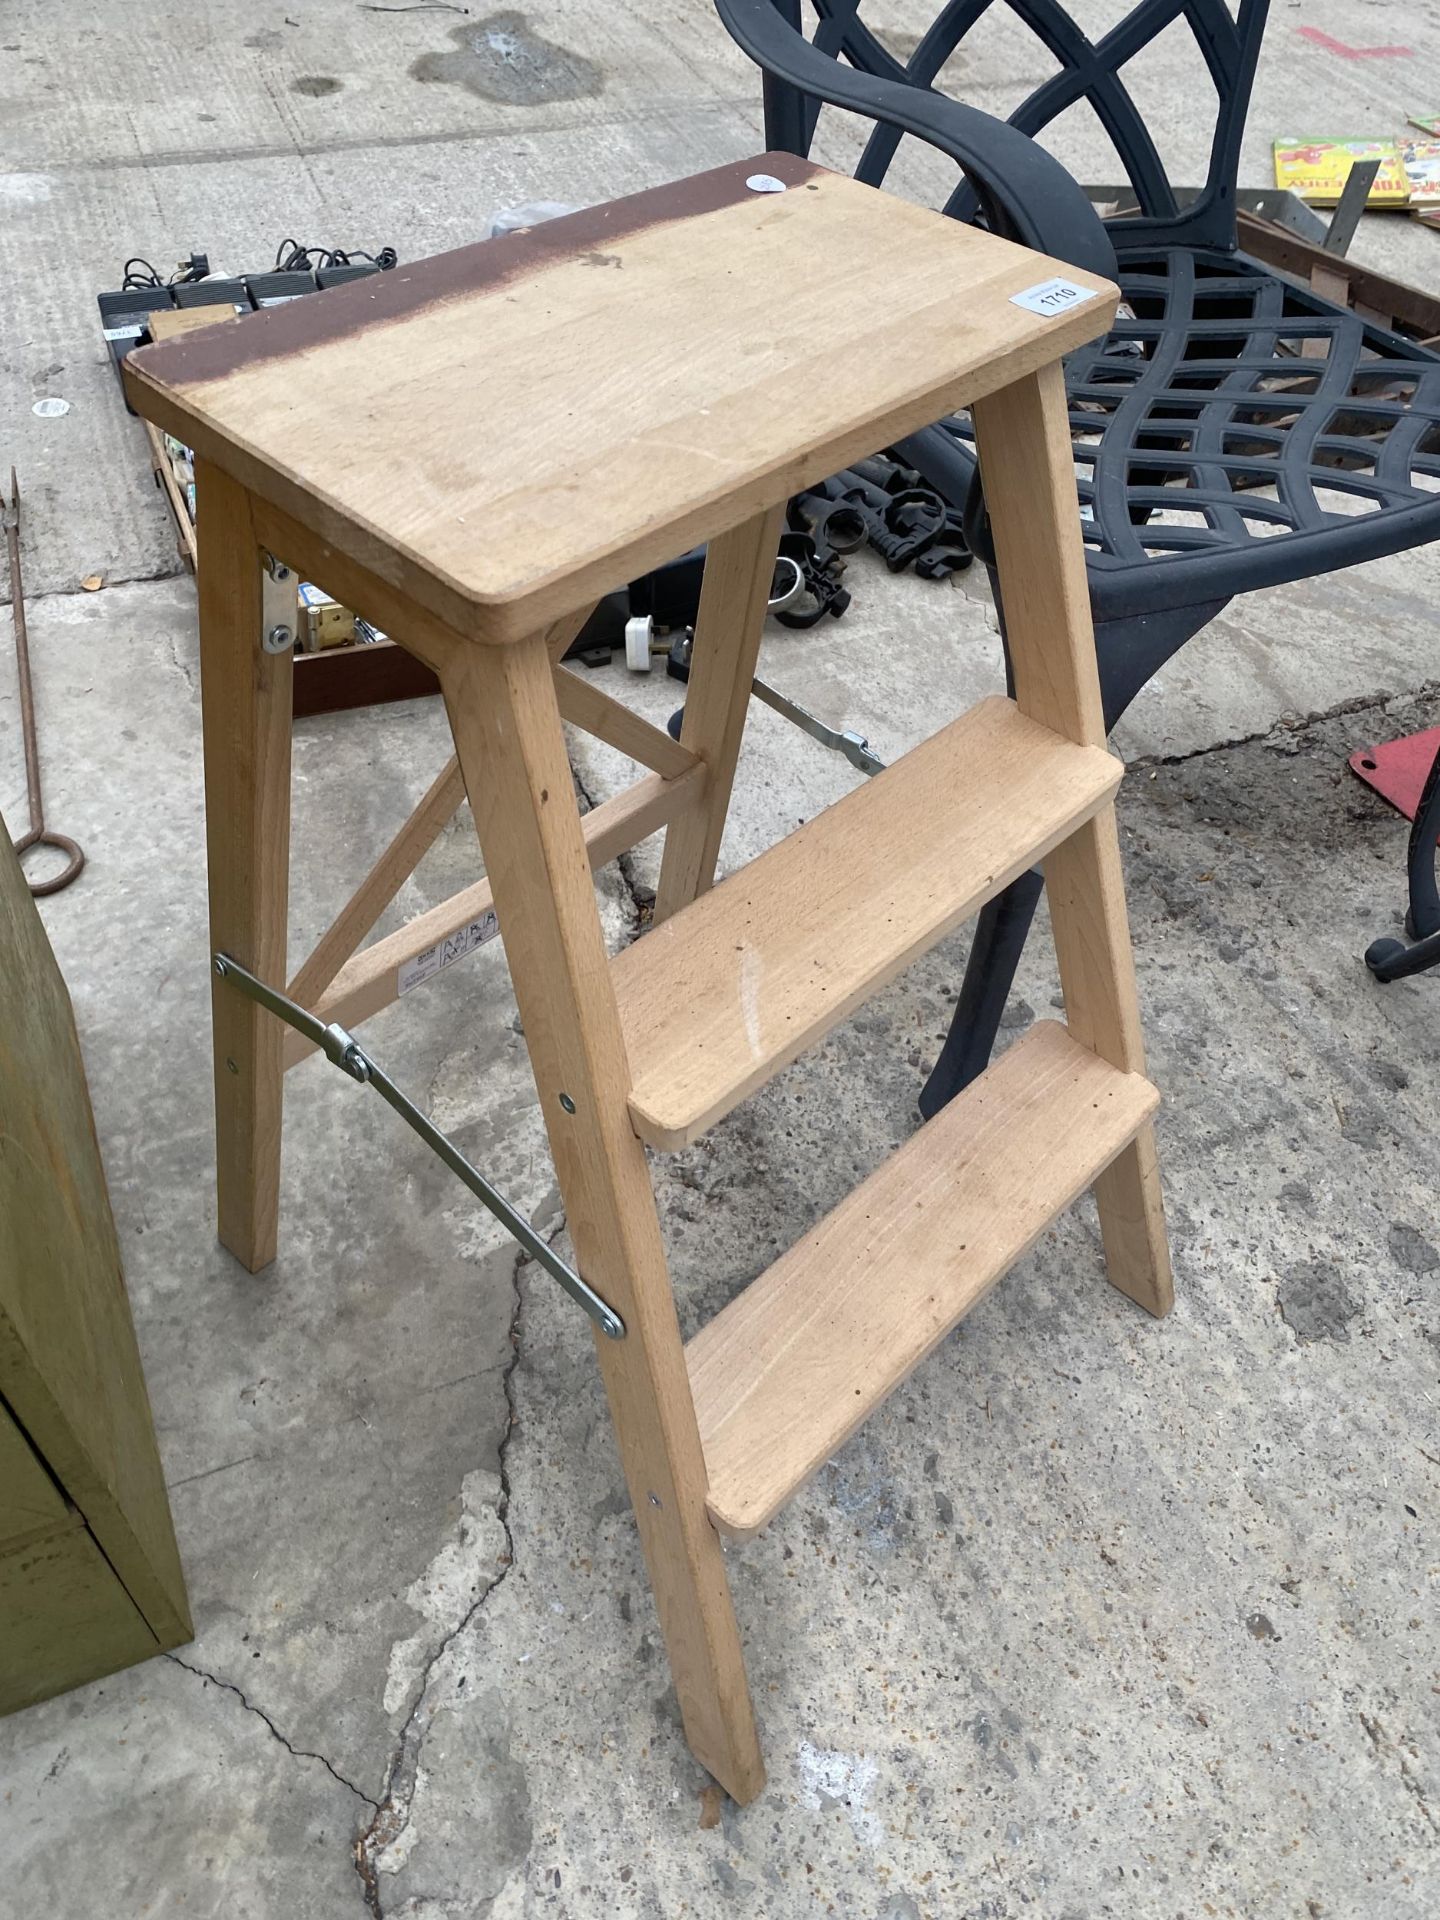 A SMALL WOODEN TWO RUNG STEP SEAT